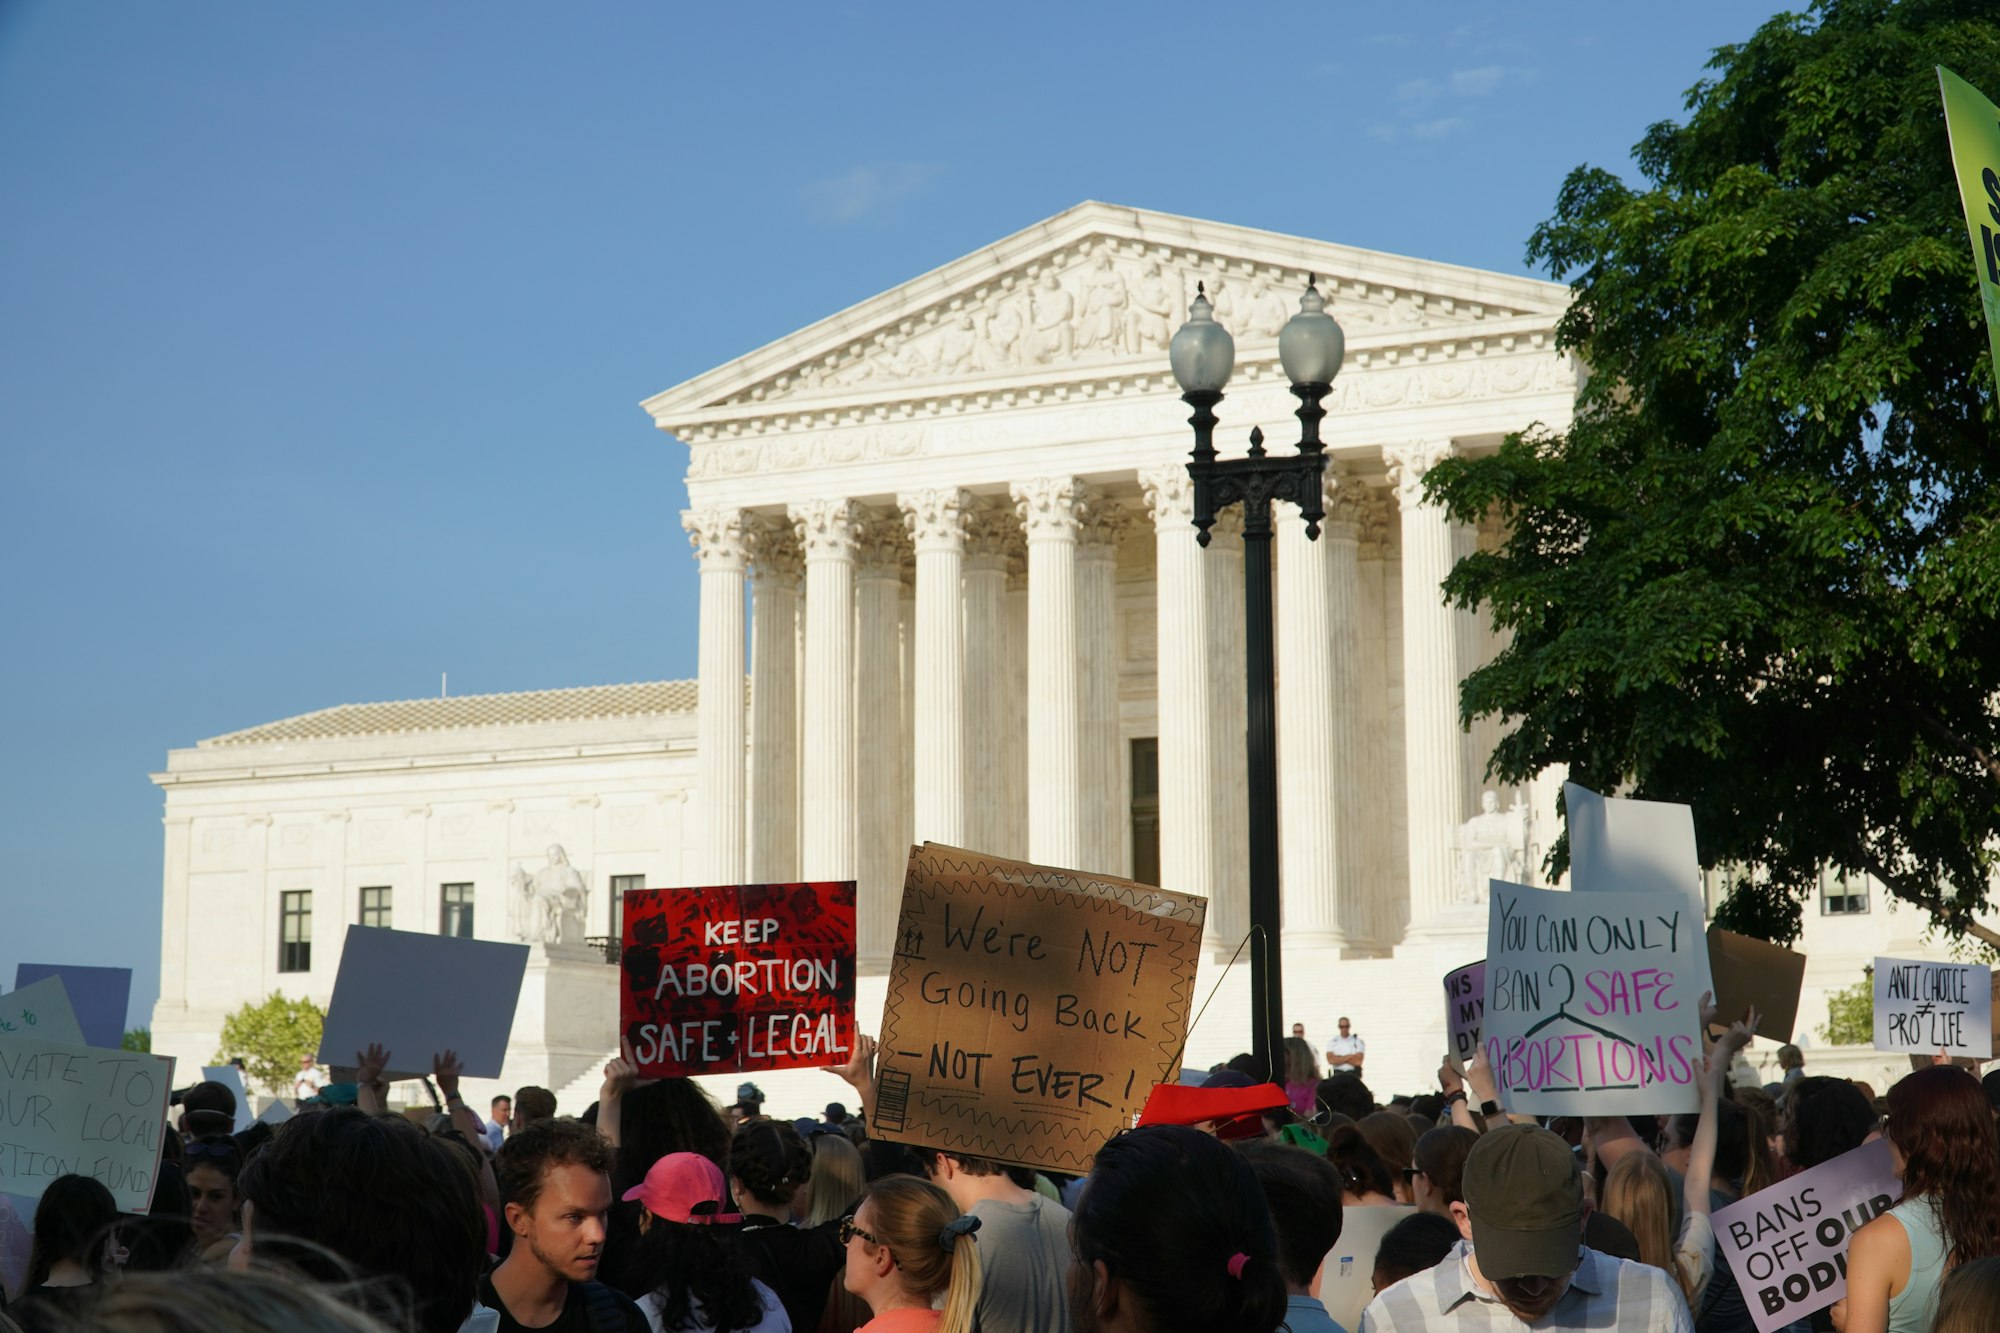 Protestors in front of the Supreme Court on May 3, after a leaked draft opinion showed the court was preparing to overturn Roe v. Wade and push women's rights back by half a century. 